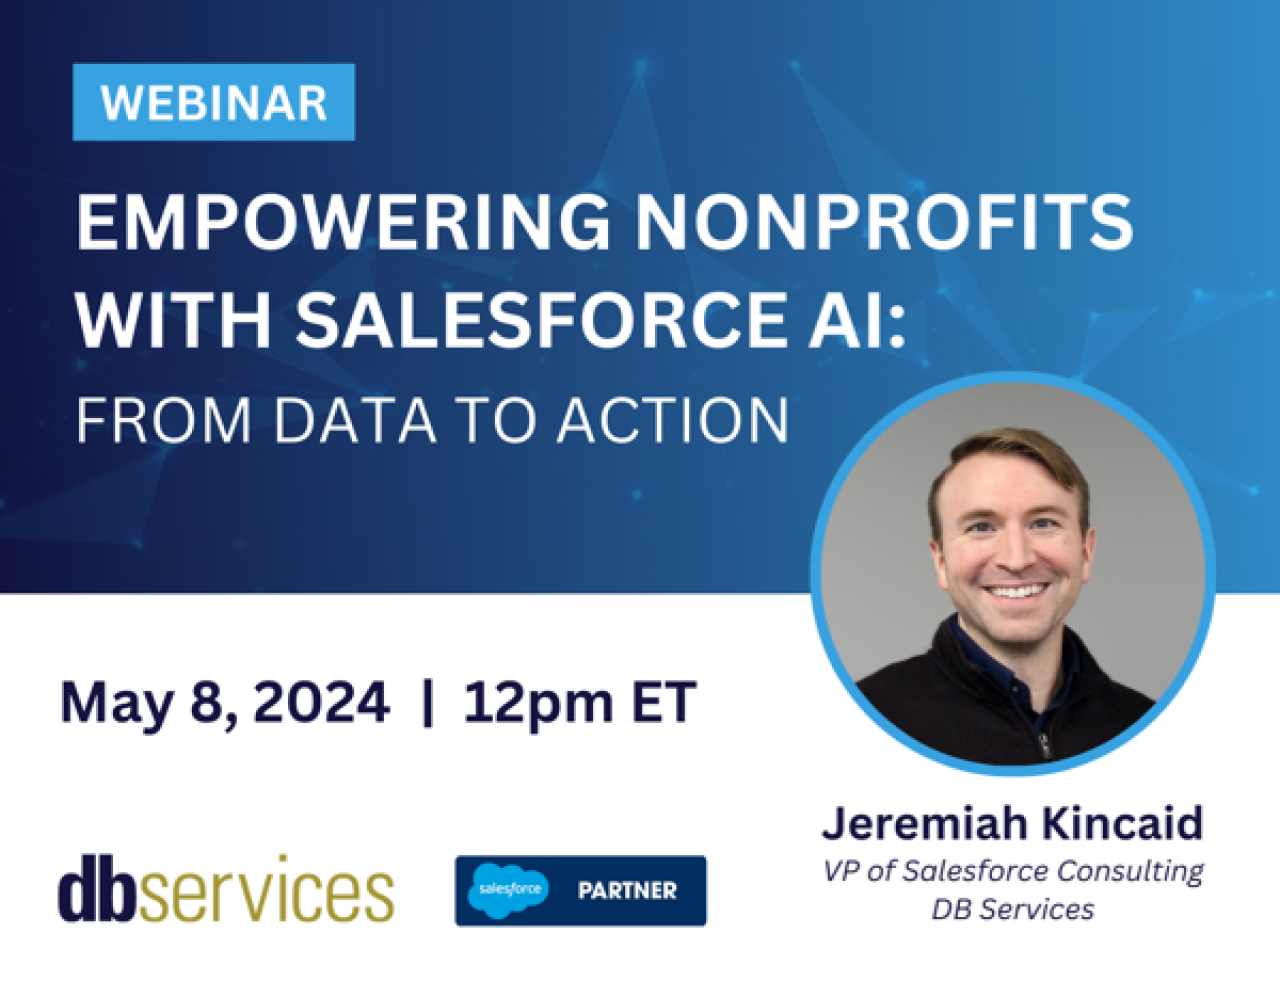 webinar empowering nonprofits with salesforce ai.